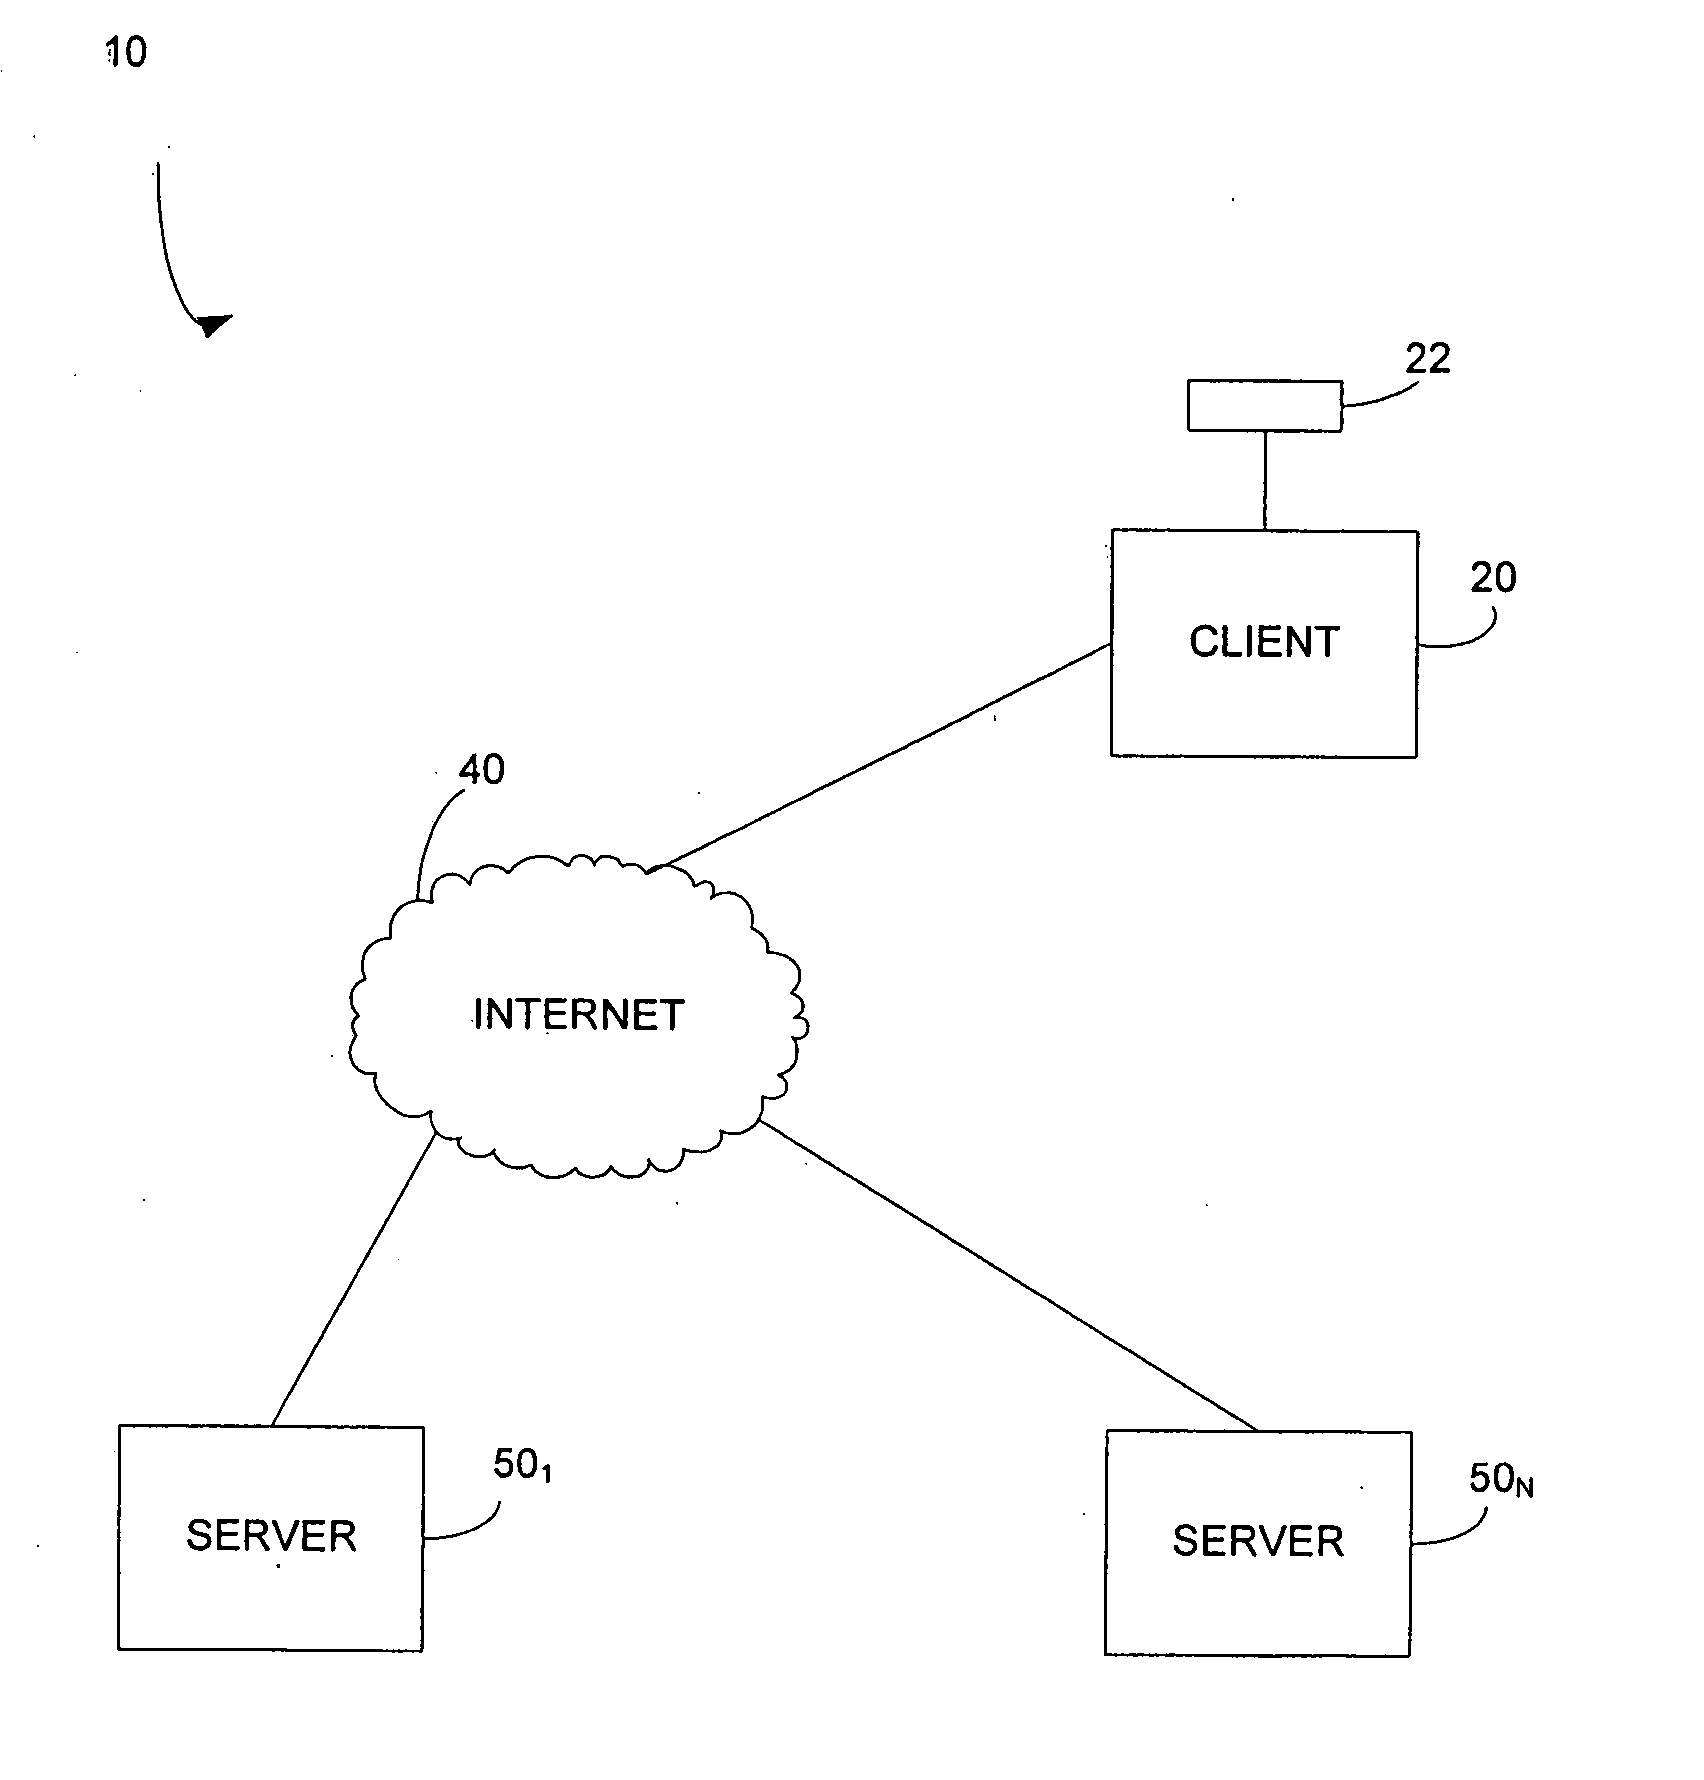 Systems and methods for managing and using multiple concept networks for assisted search processing